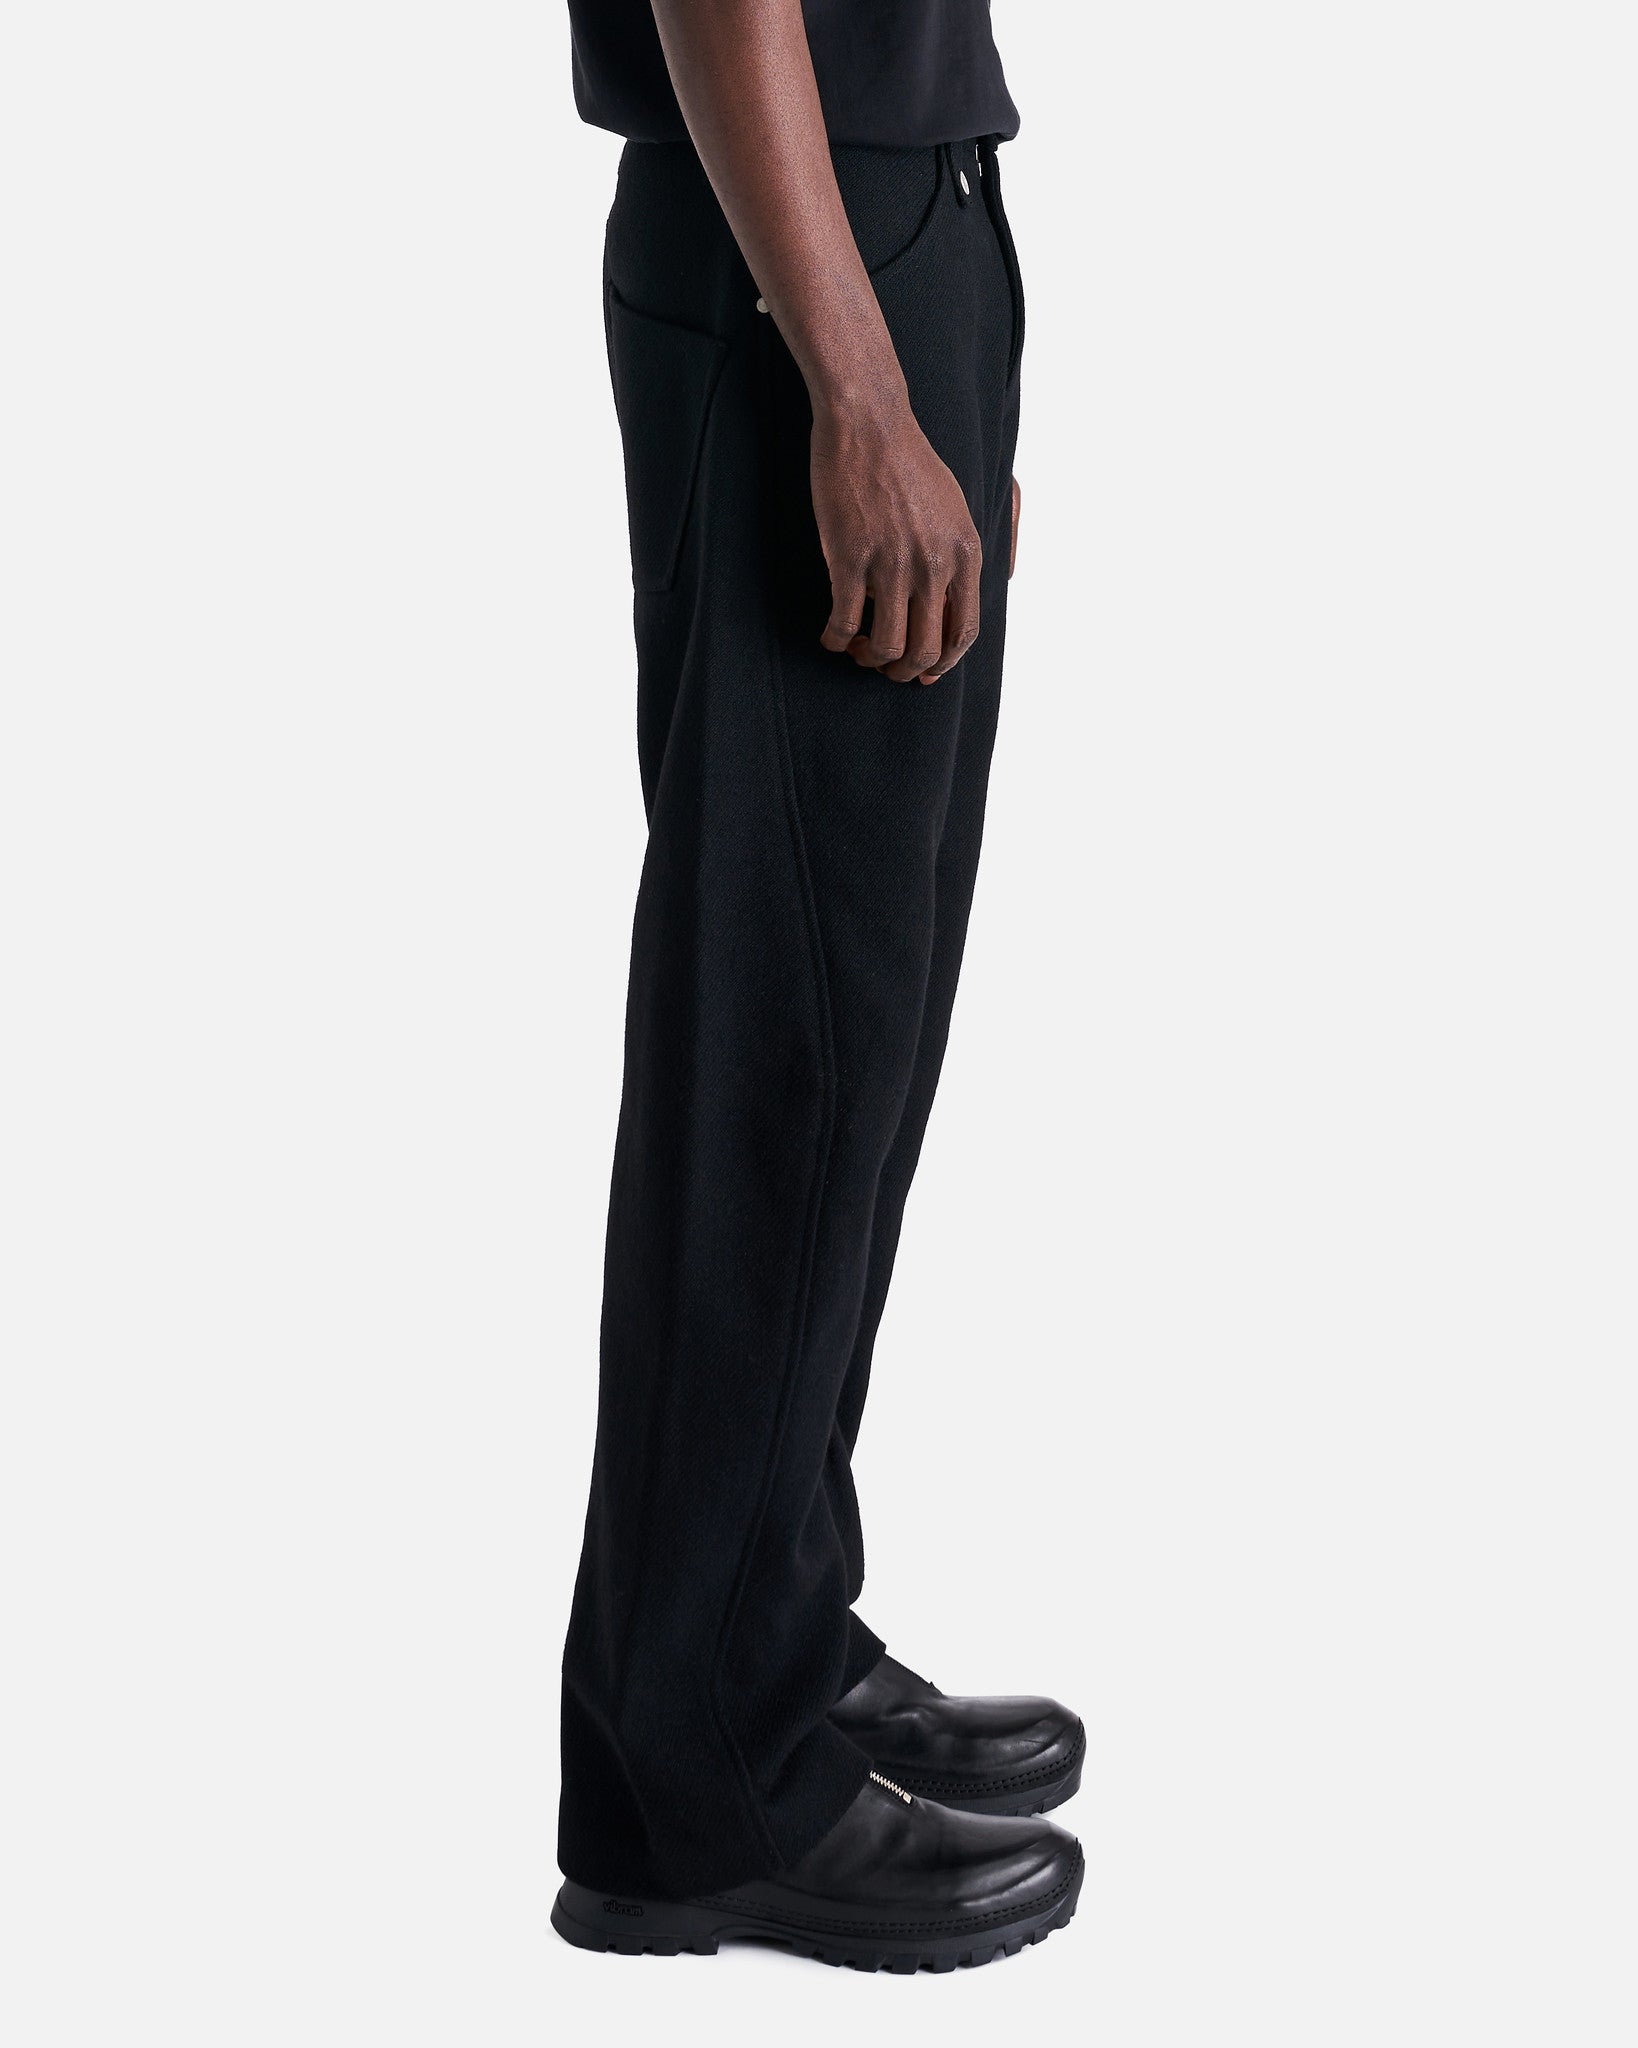 Twisted Trousers in Black Dry Wool